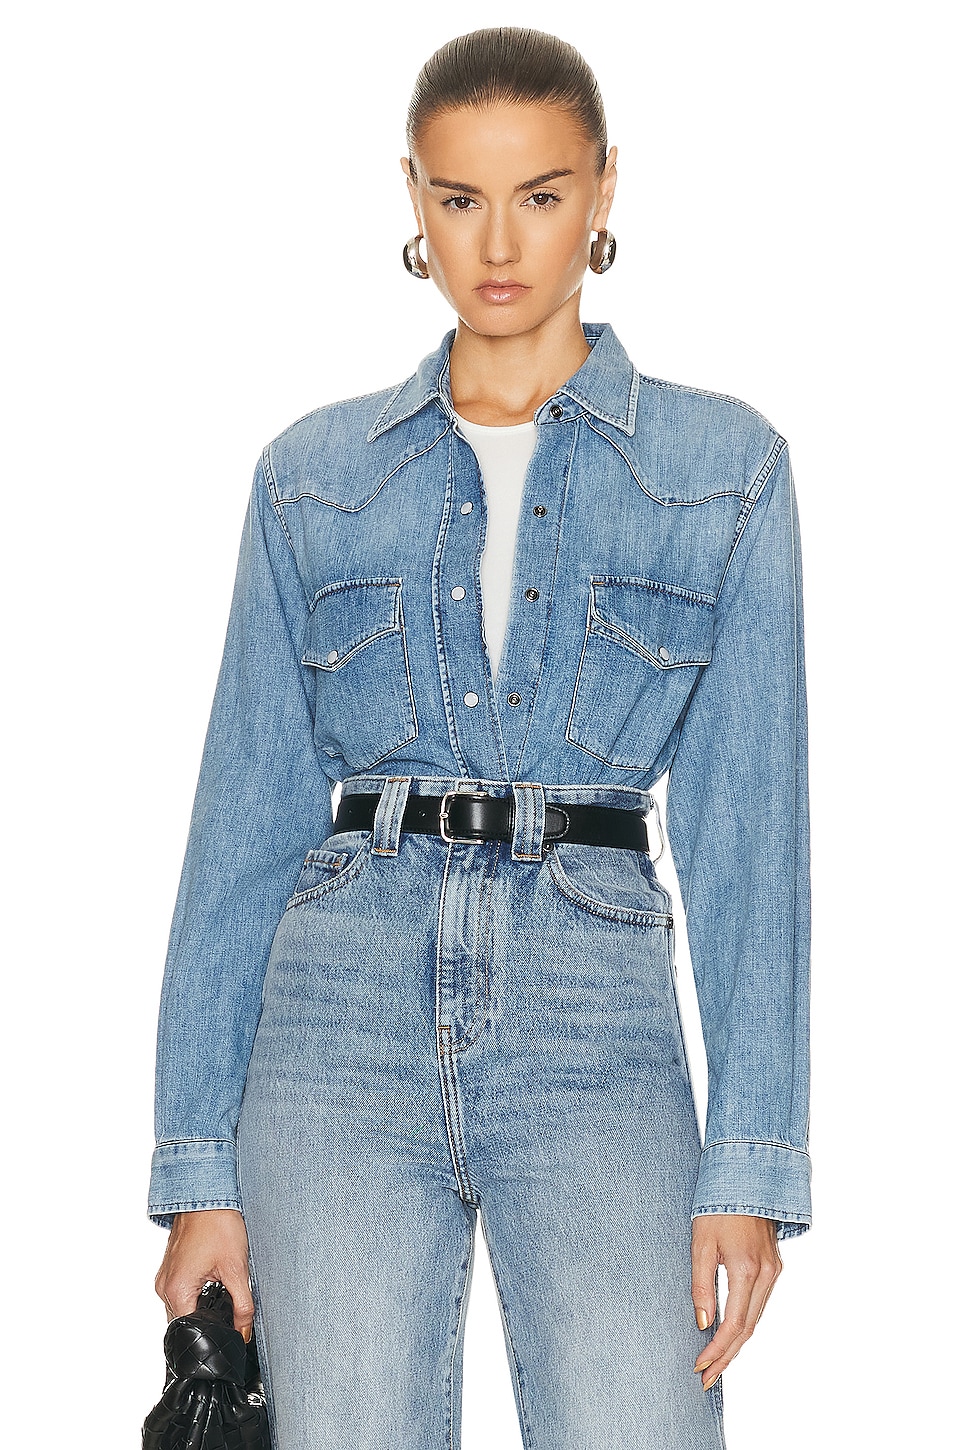 Citizens of Humanity Cropped Western Shirt in Carolina Blue | FWRD